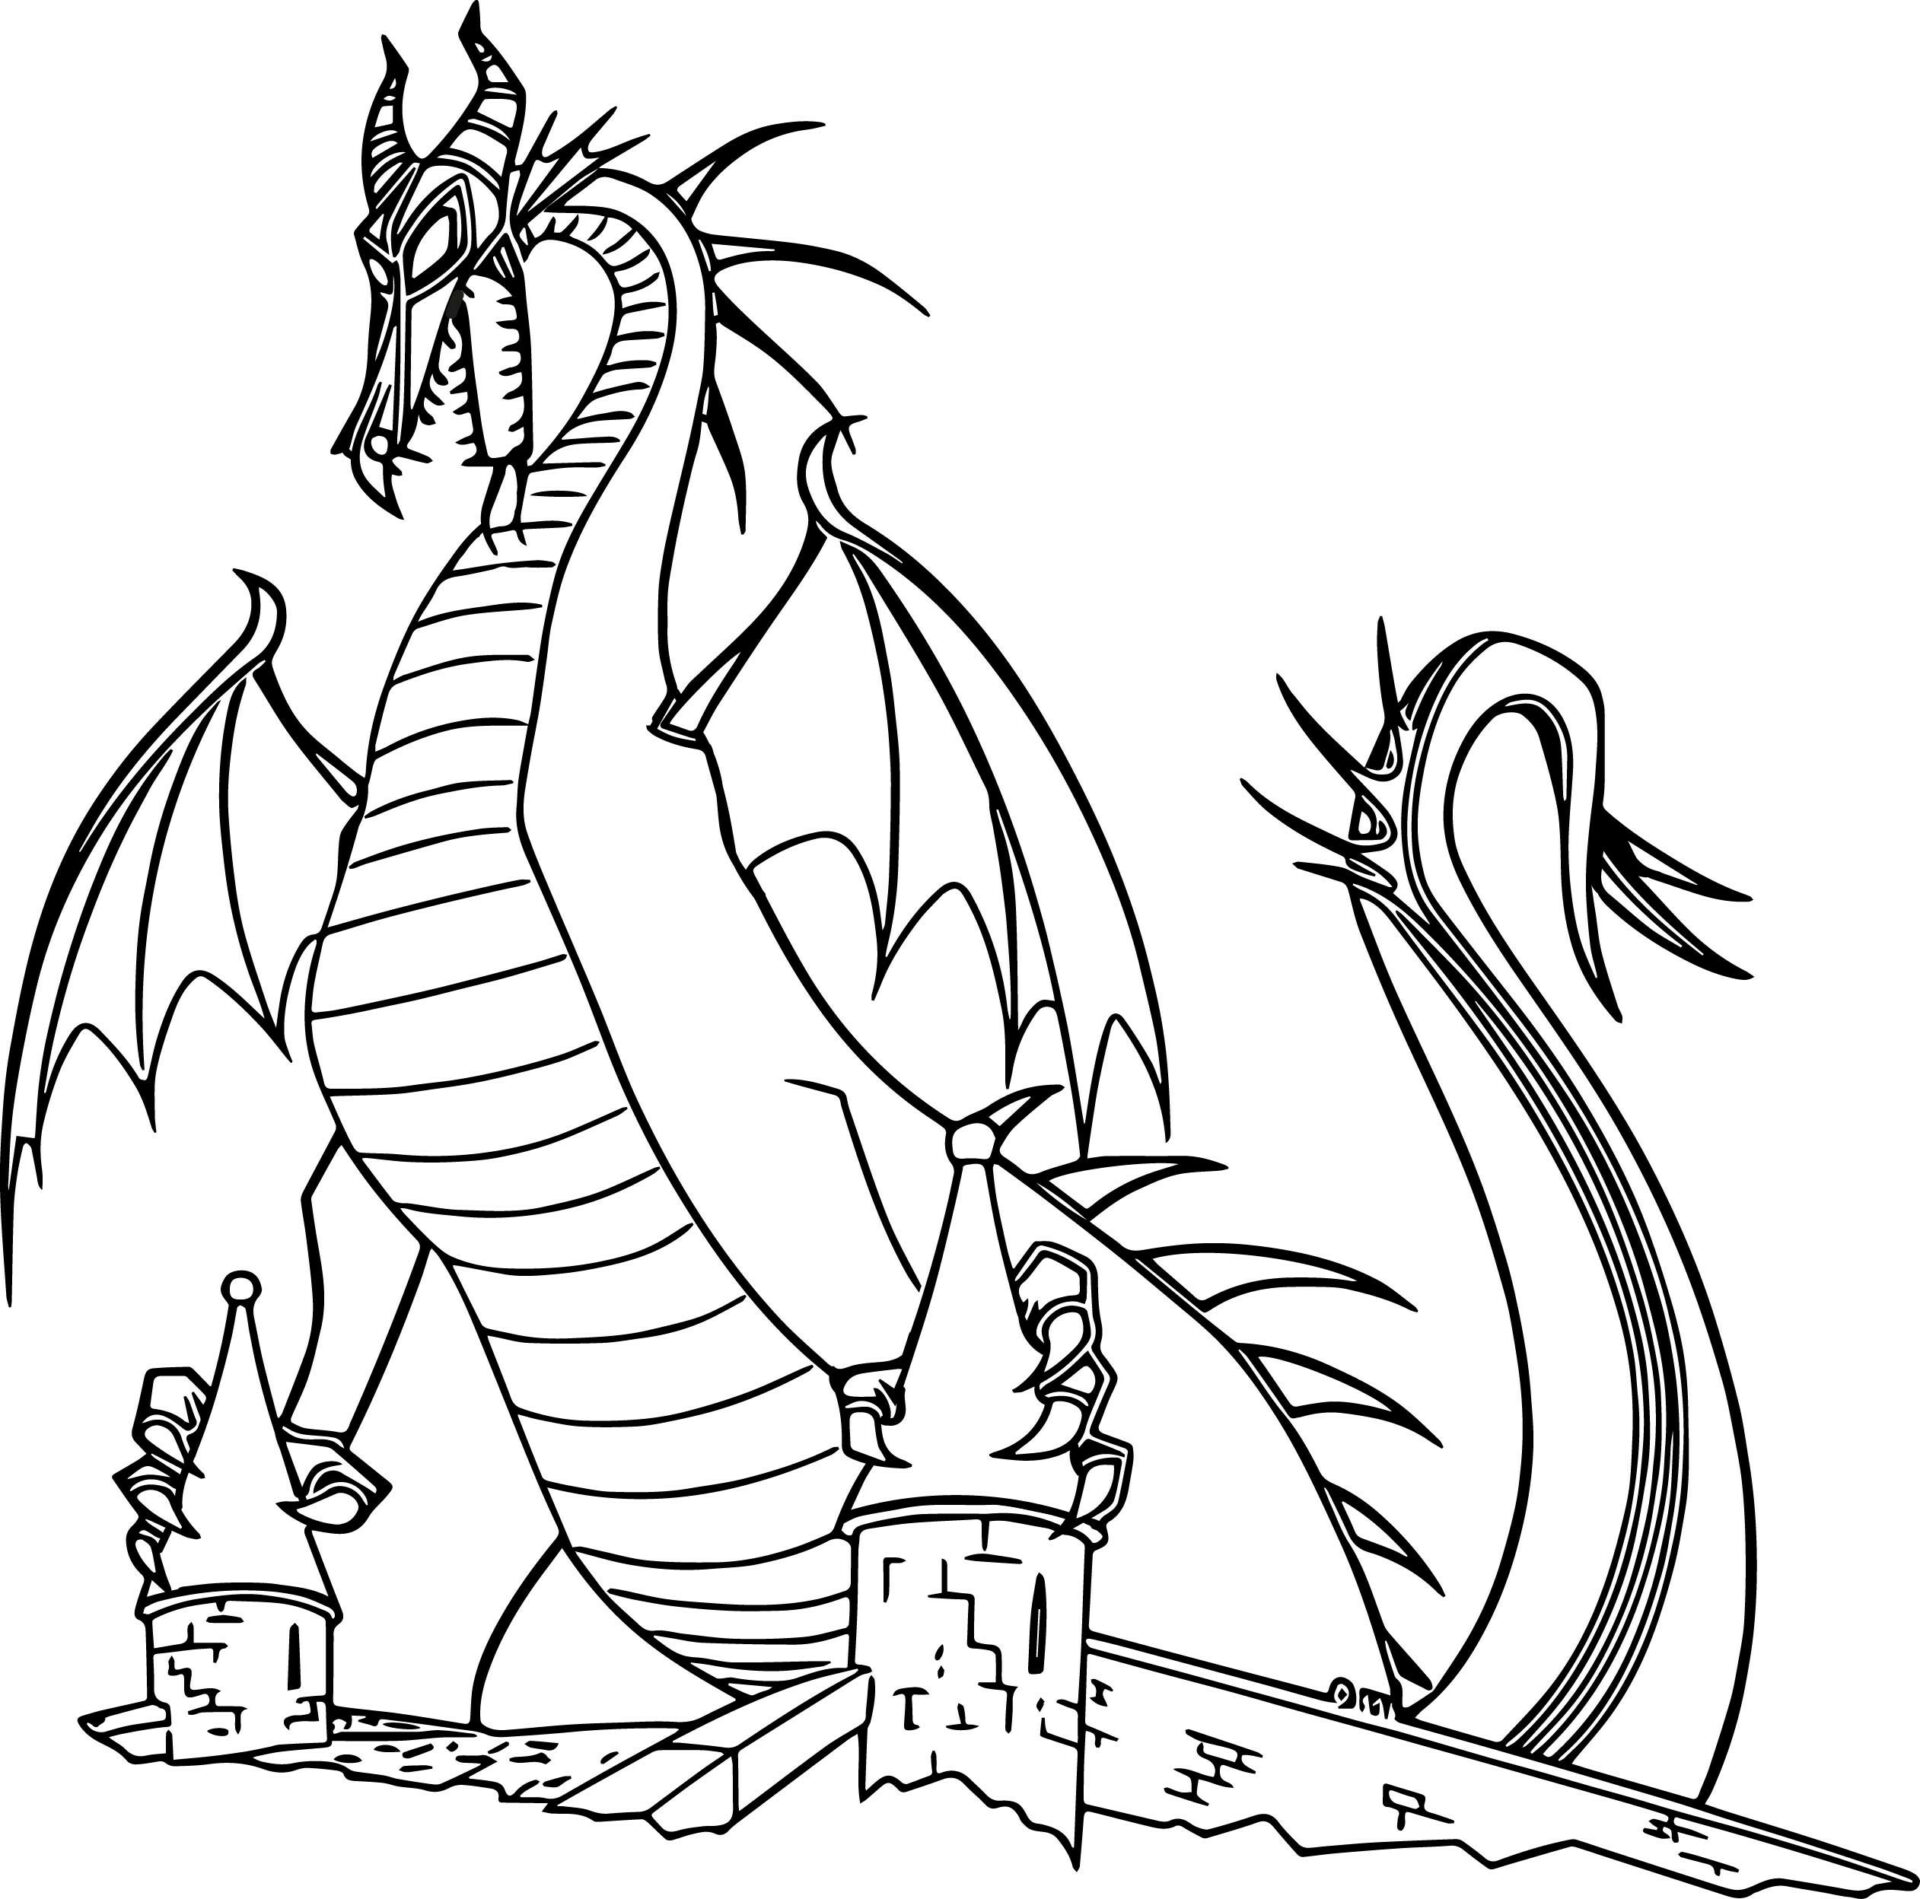 Download Sleeping Beauty Dragon Coloring Page Free Printable Coloring Pages For Kids